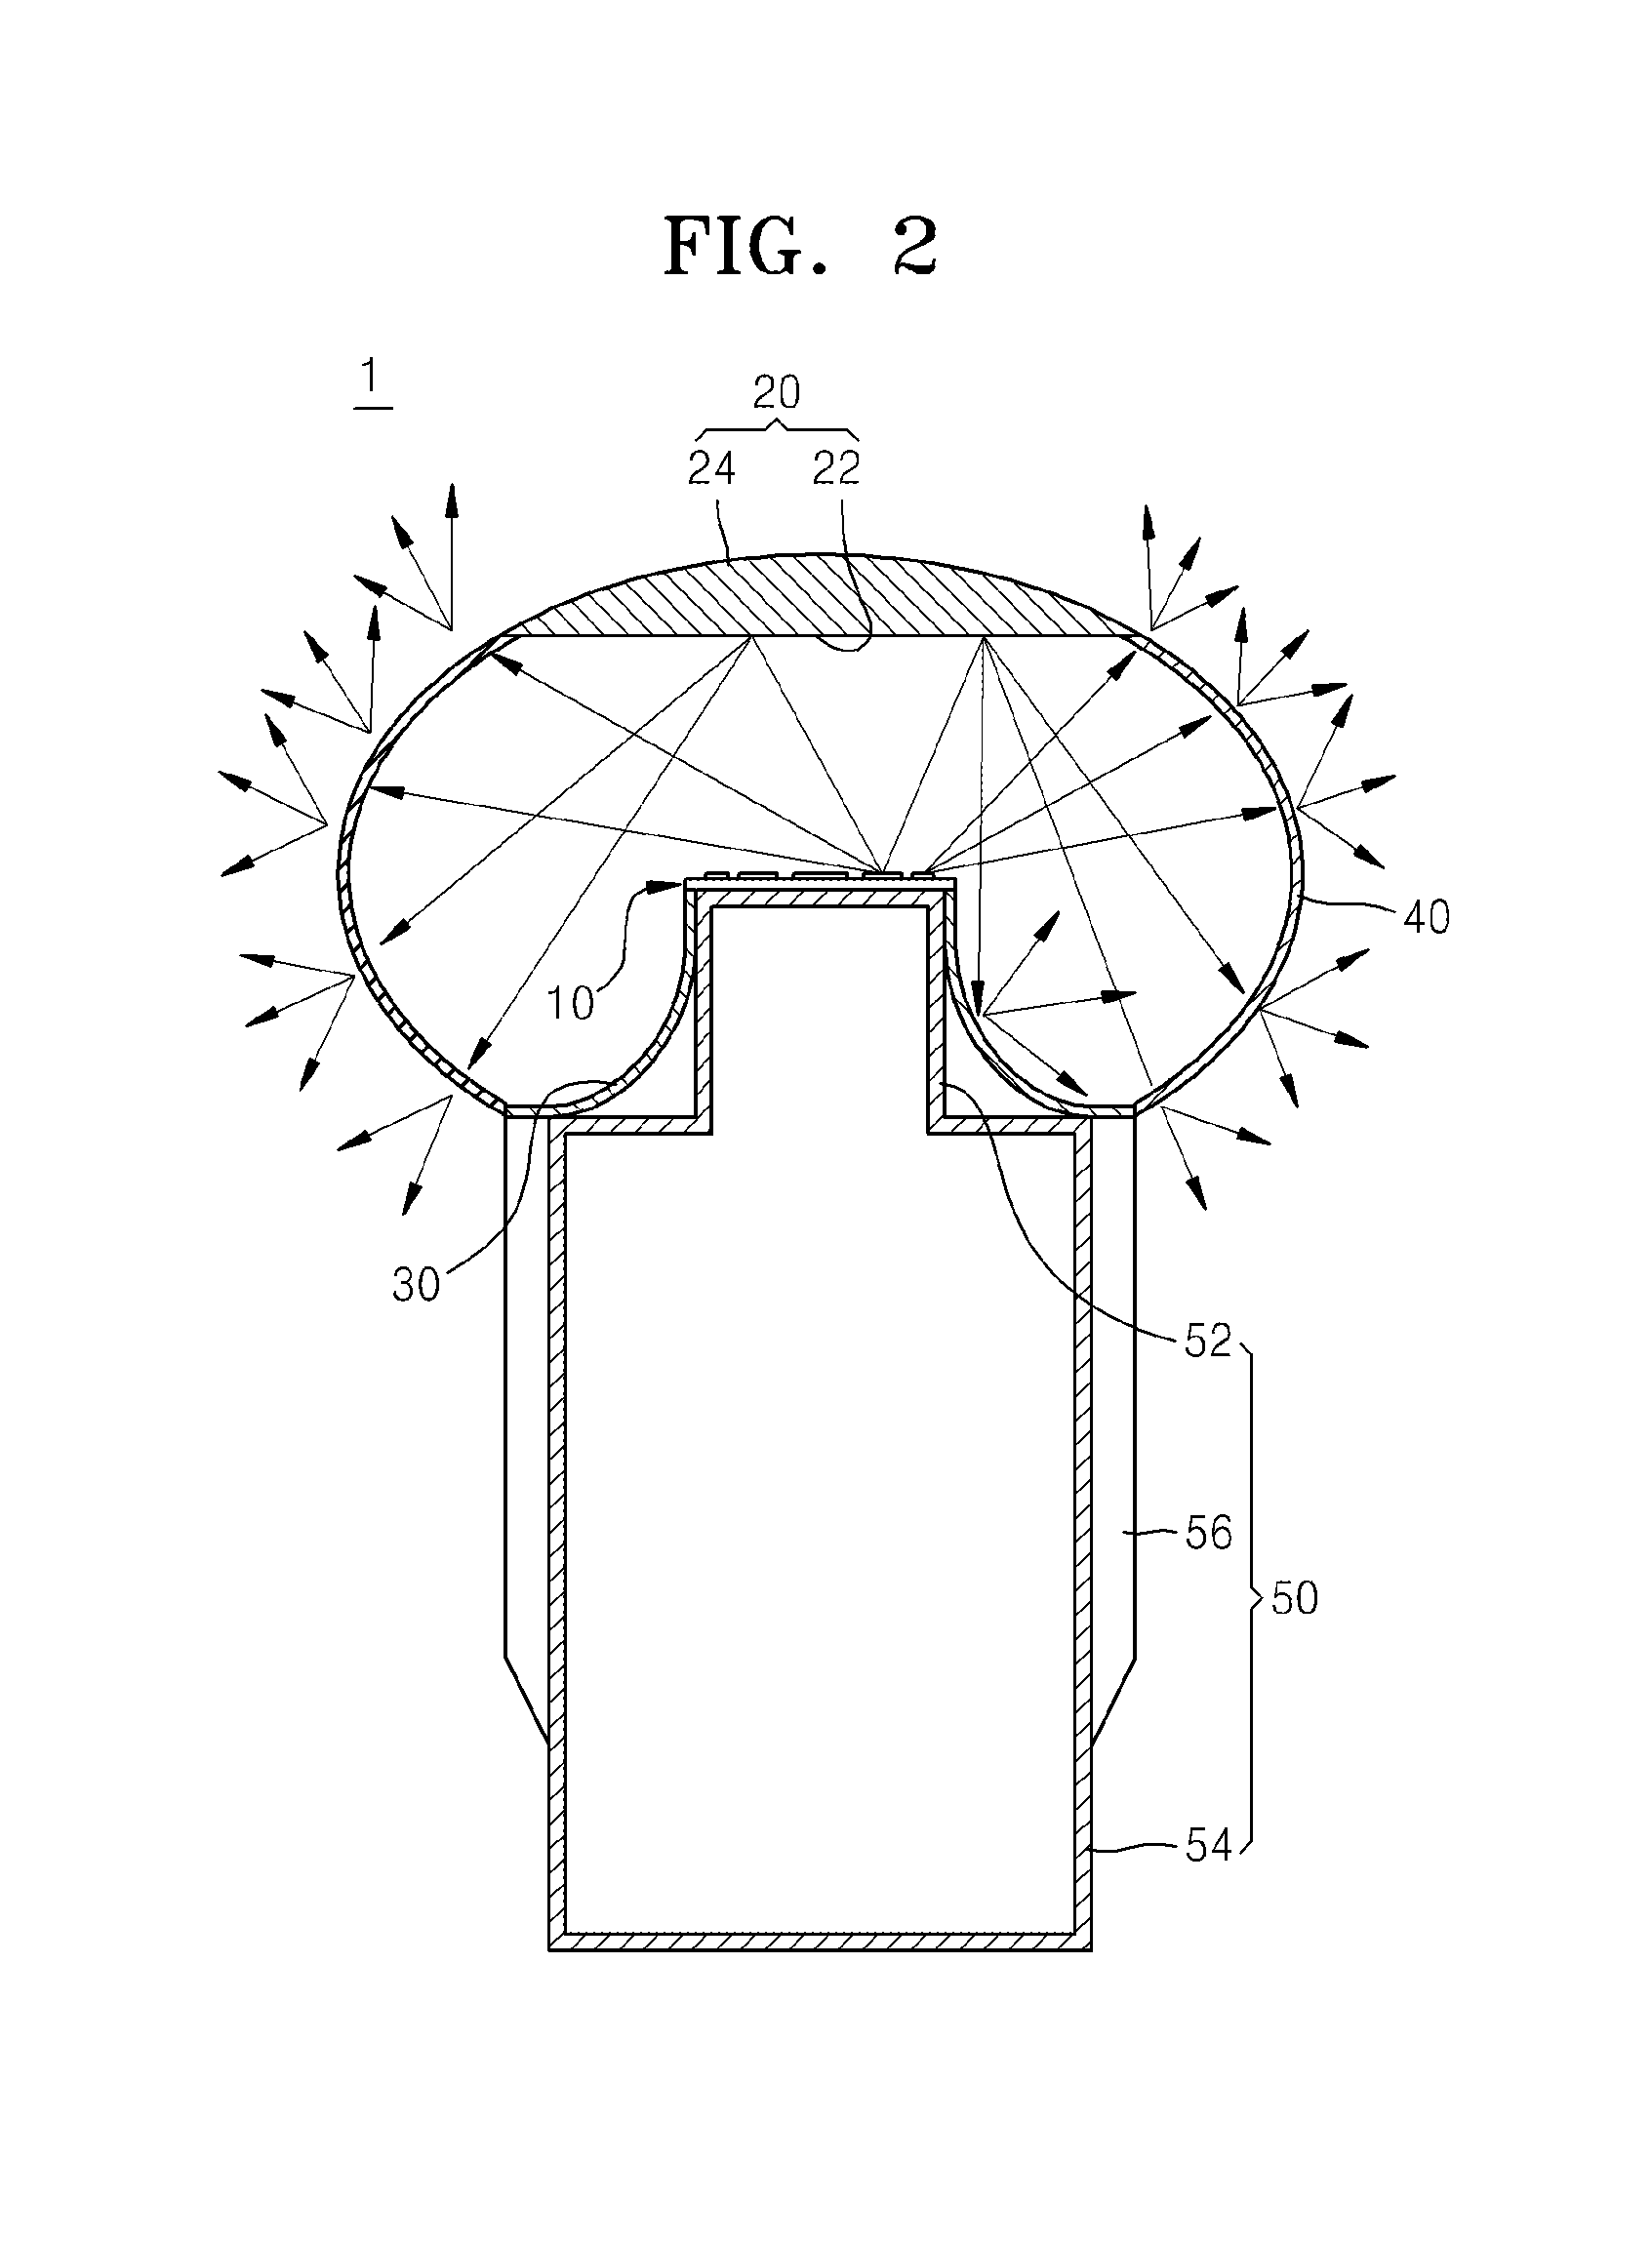 Lighting device capable of emitting light with a wide angle